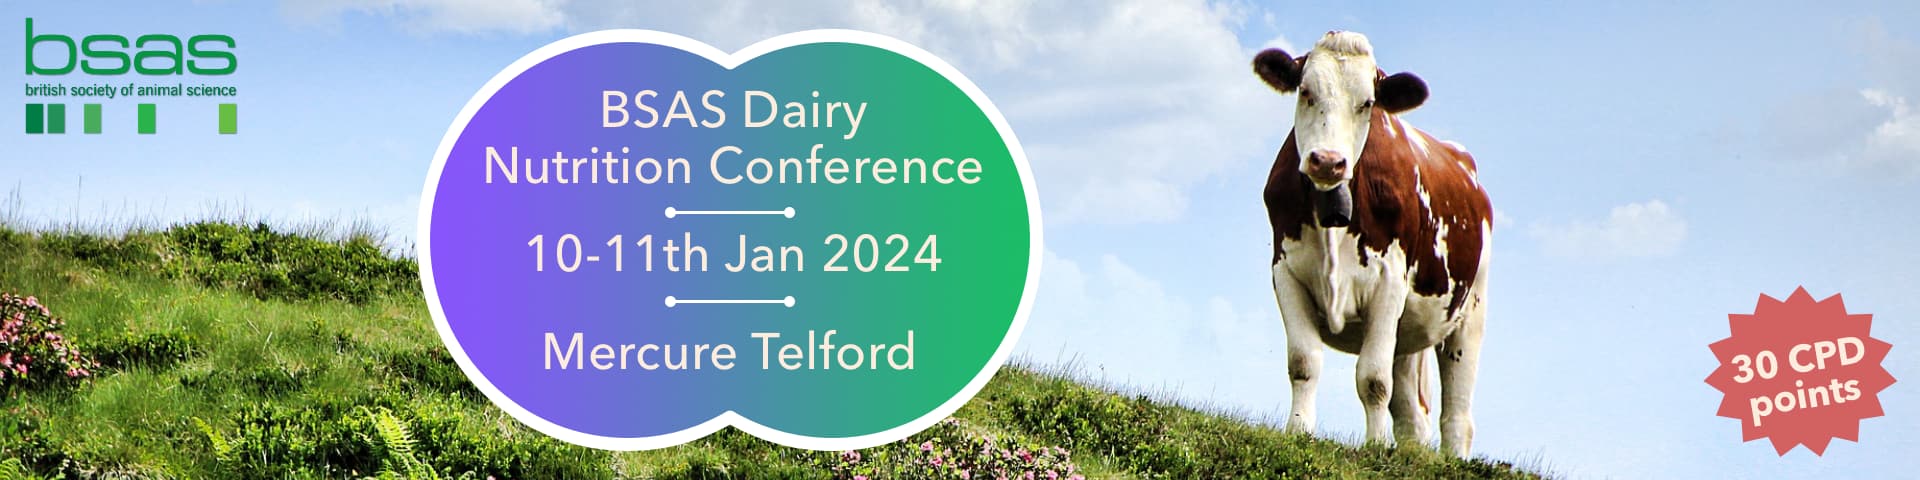 Dairy Conference 2024